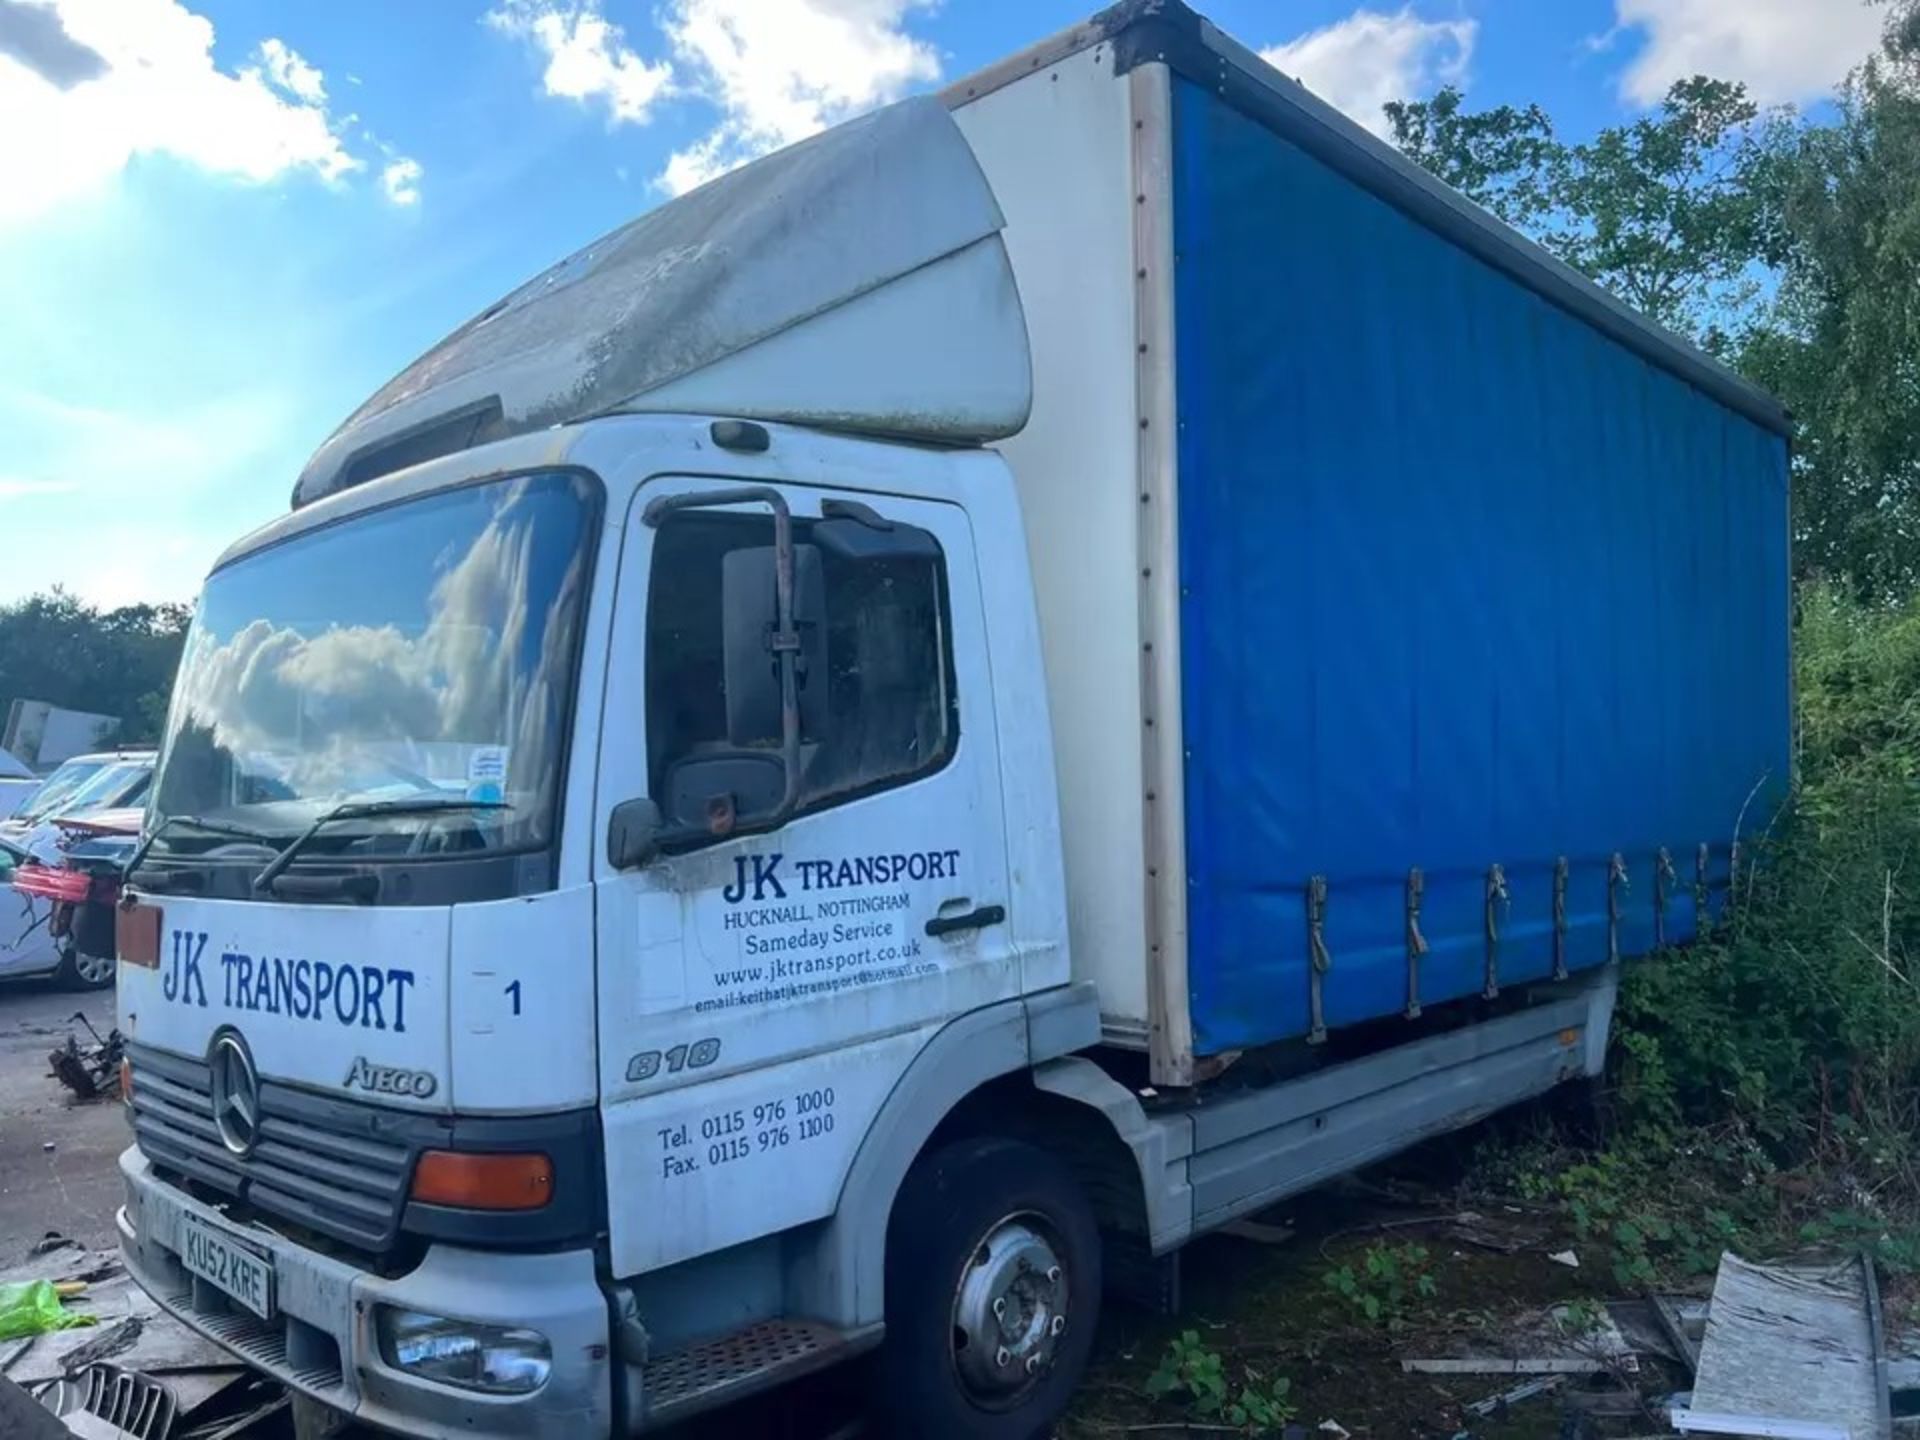 2002 MERCEDES-BENZ ATEGO 818 7.5 TON CURTAINSIDER SPARES OR REPAIRS - Image 2 of 3